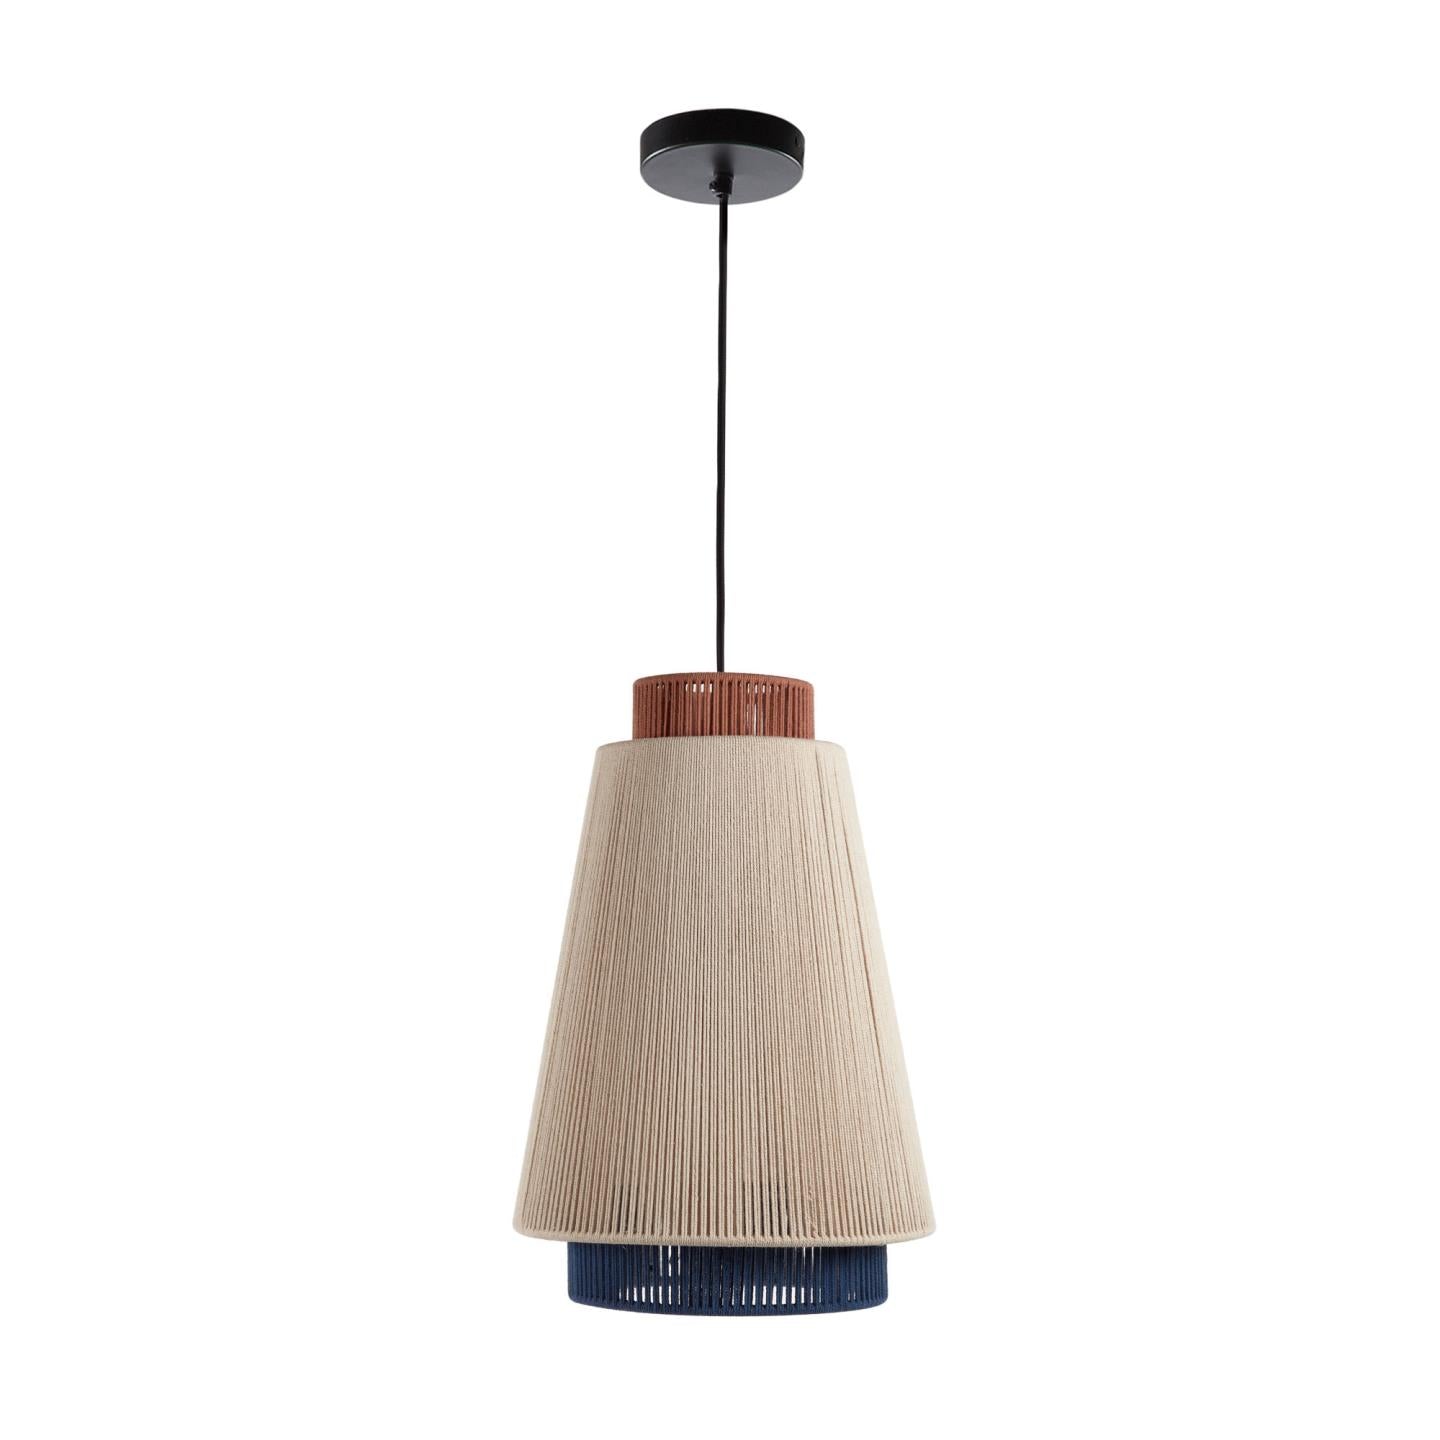 Yuvia cotton ceiling lamp with a beige, blue, and terracotta finish